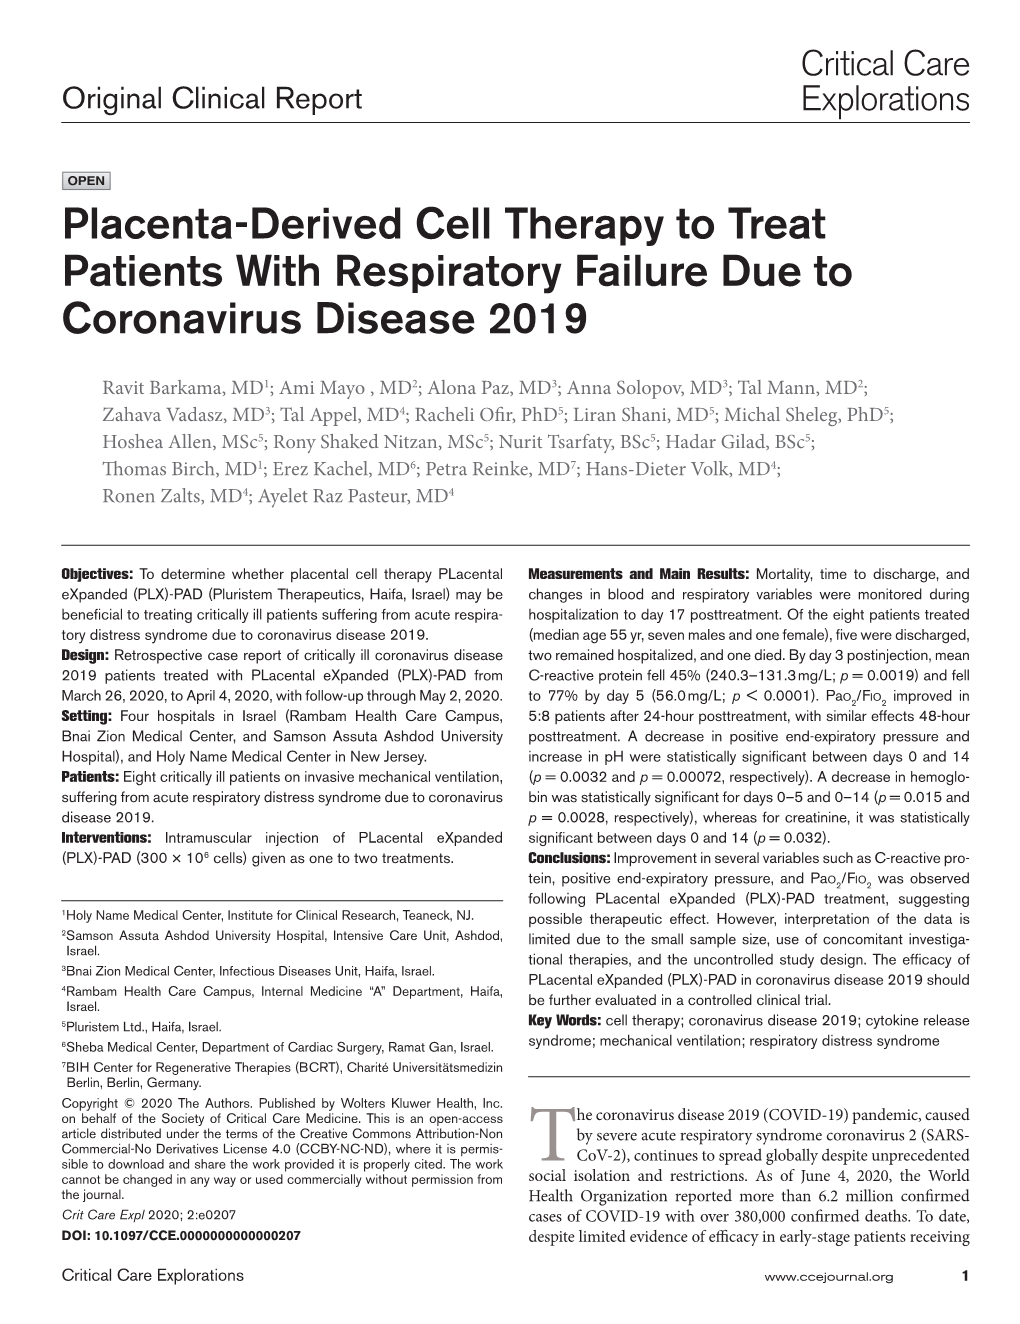 Placenta-Derived Cell Therapy to Treat Patients with Respiratory Failure Due to Coronavirus Disease 2019